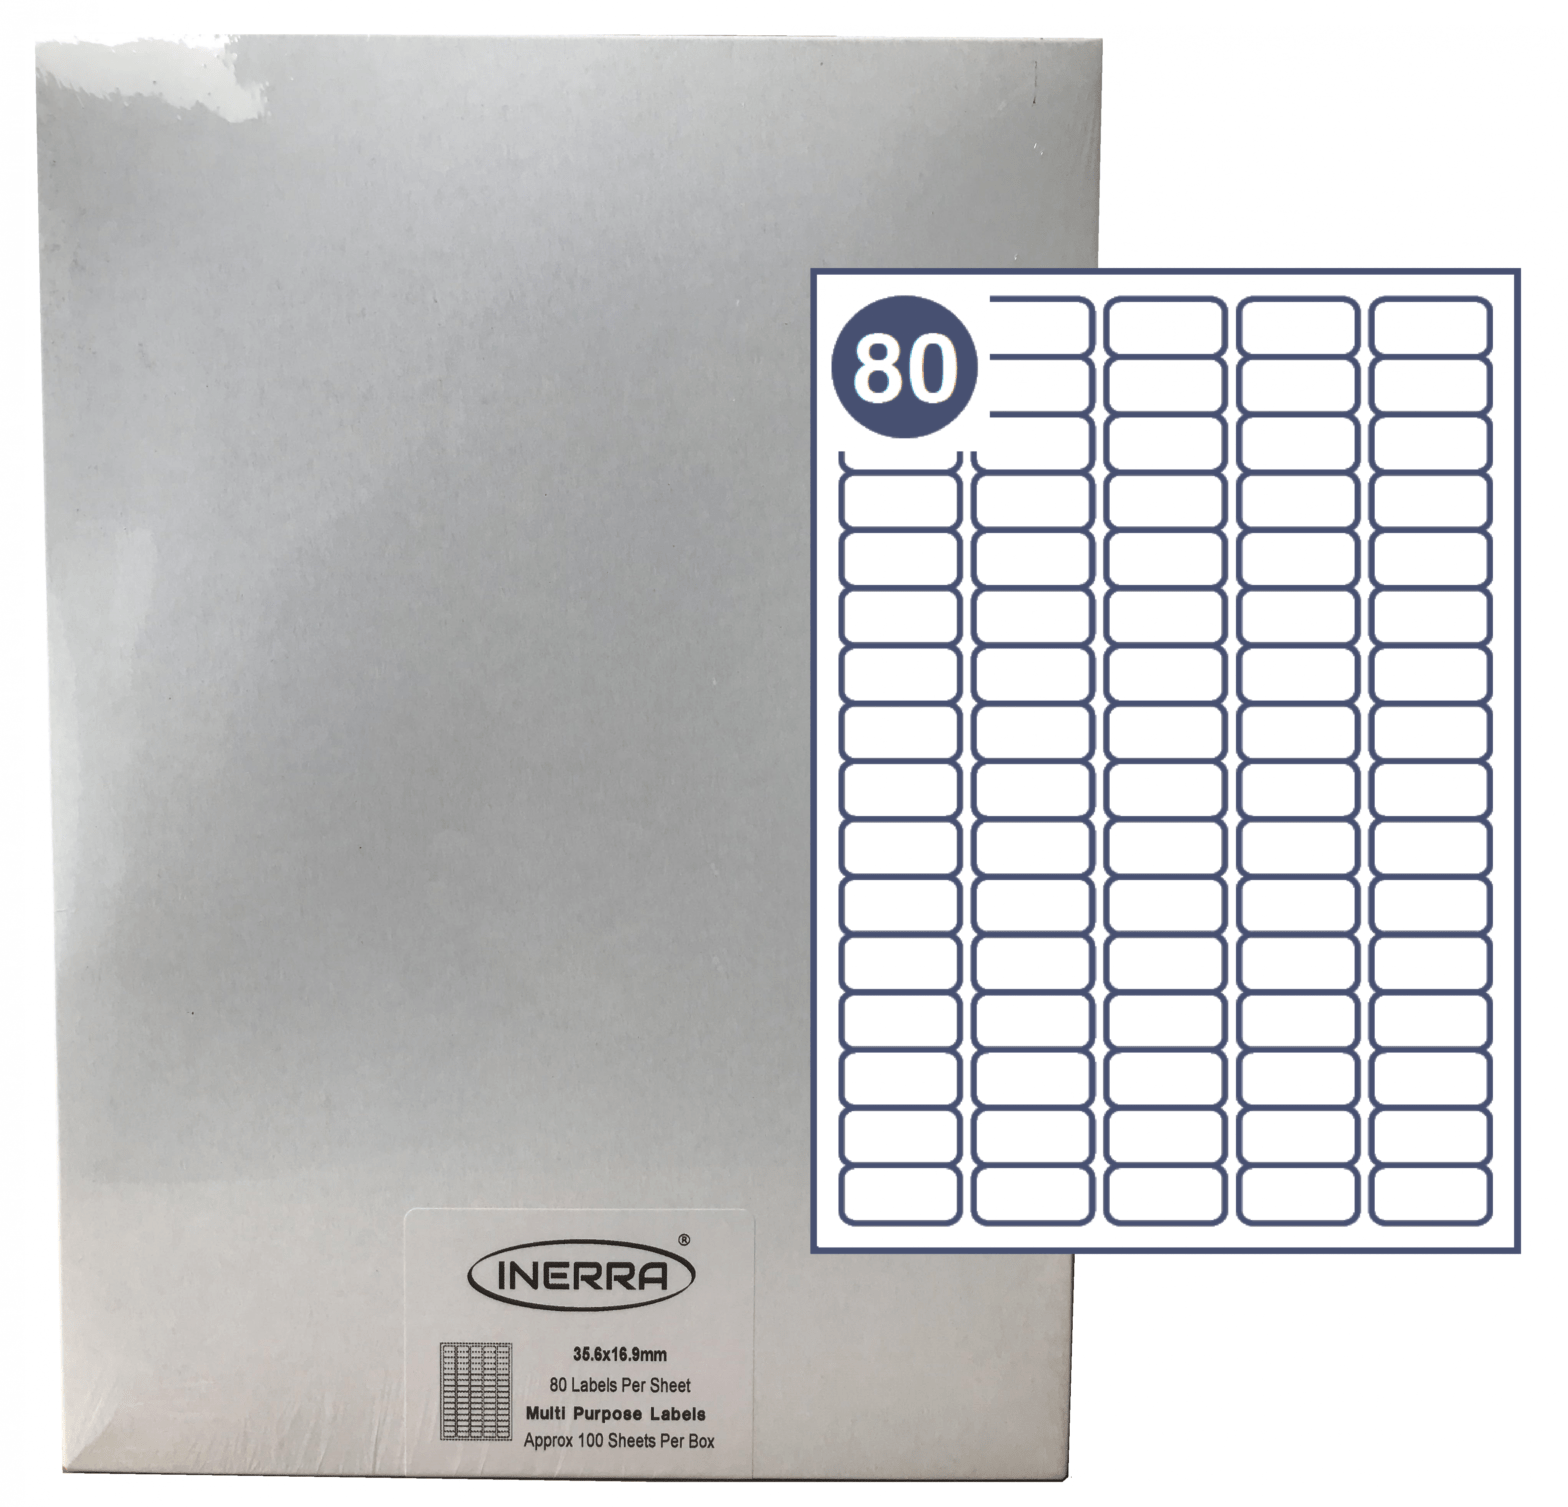 Free Template For Inerra Blank Labels - 80 Per Sheet regarding 80 Labels Per Sheet Template